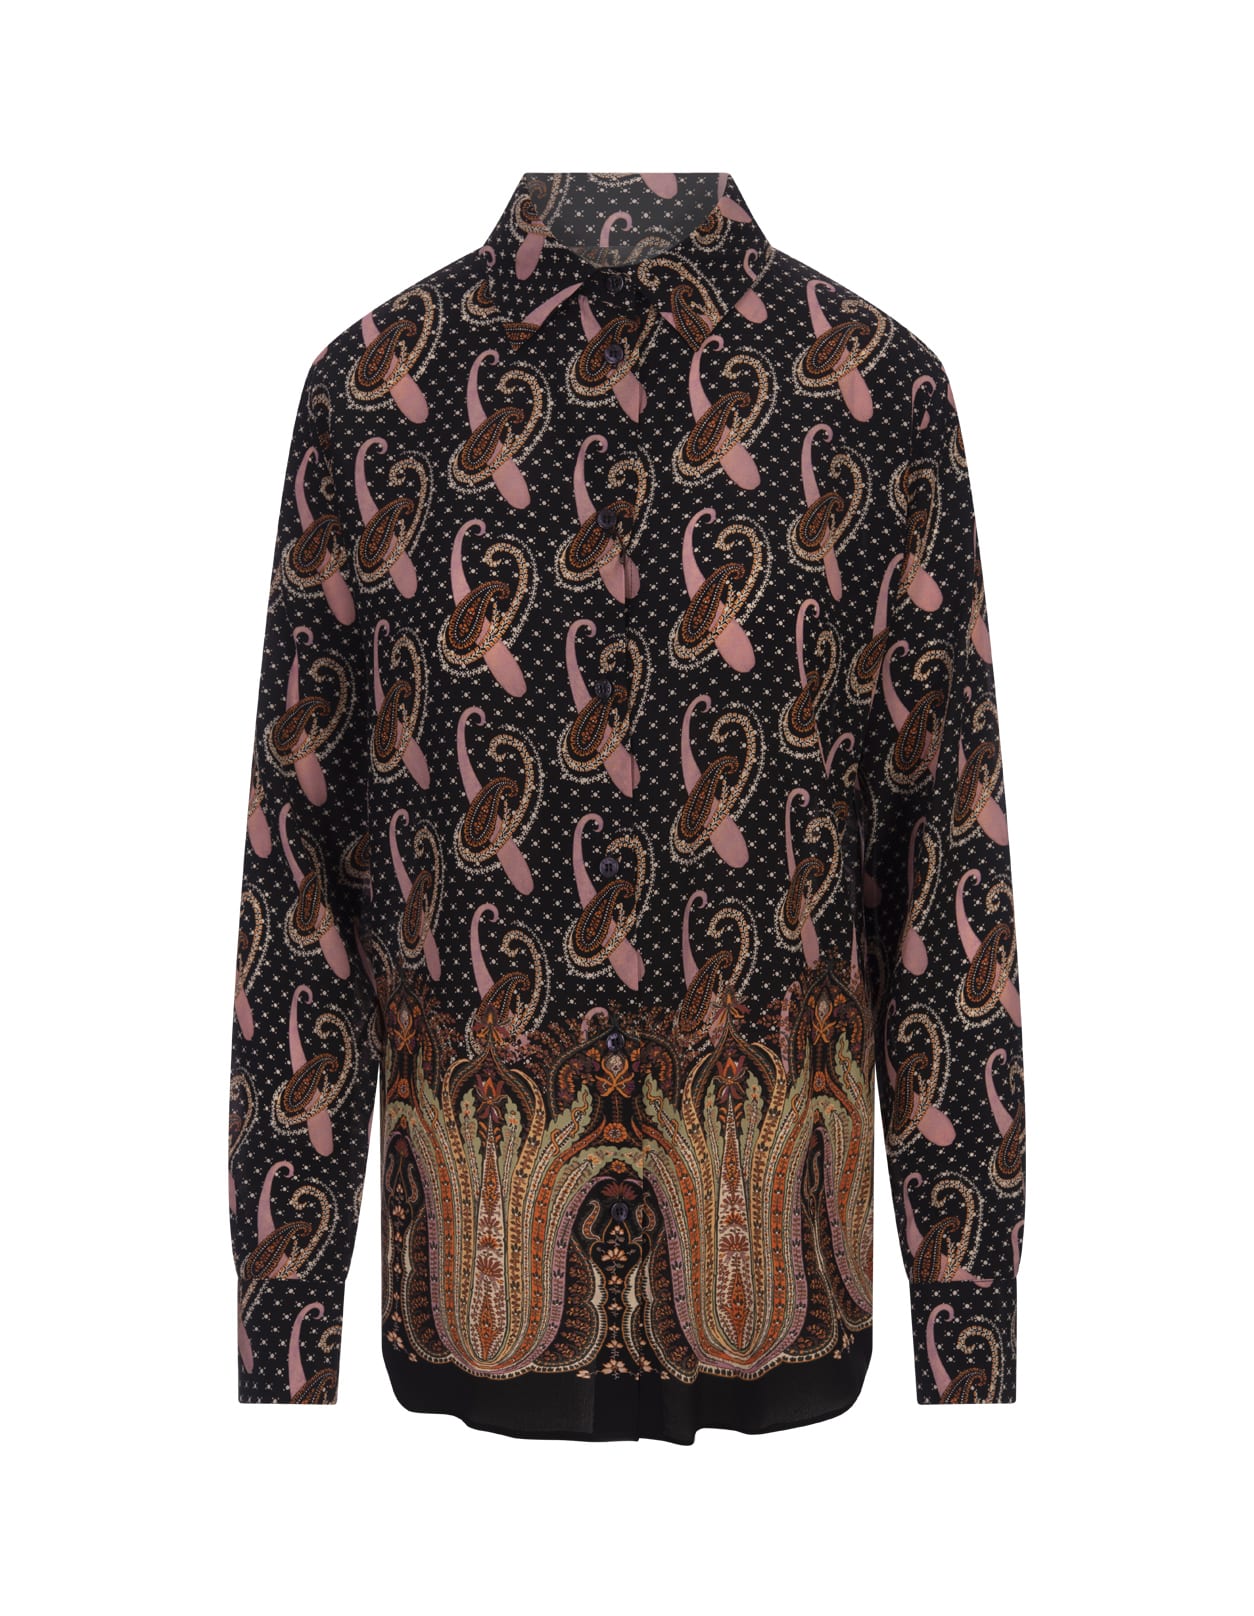 ETRO SILK SHIRT WITH PAISLEY AND POLKA DOT PATTERNS IN PINK